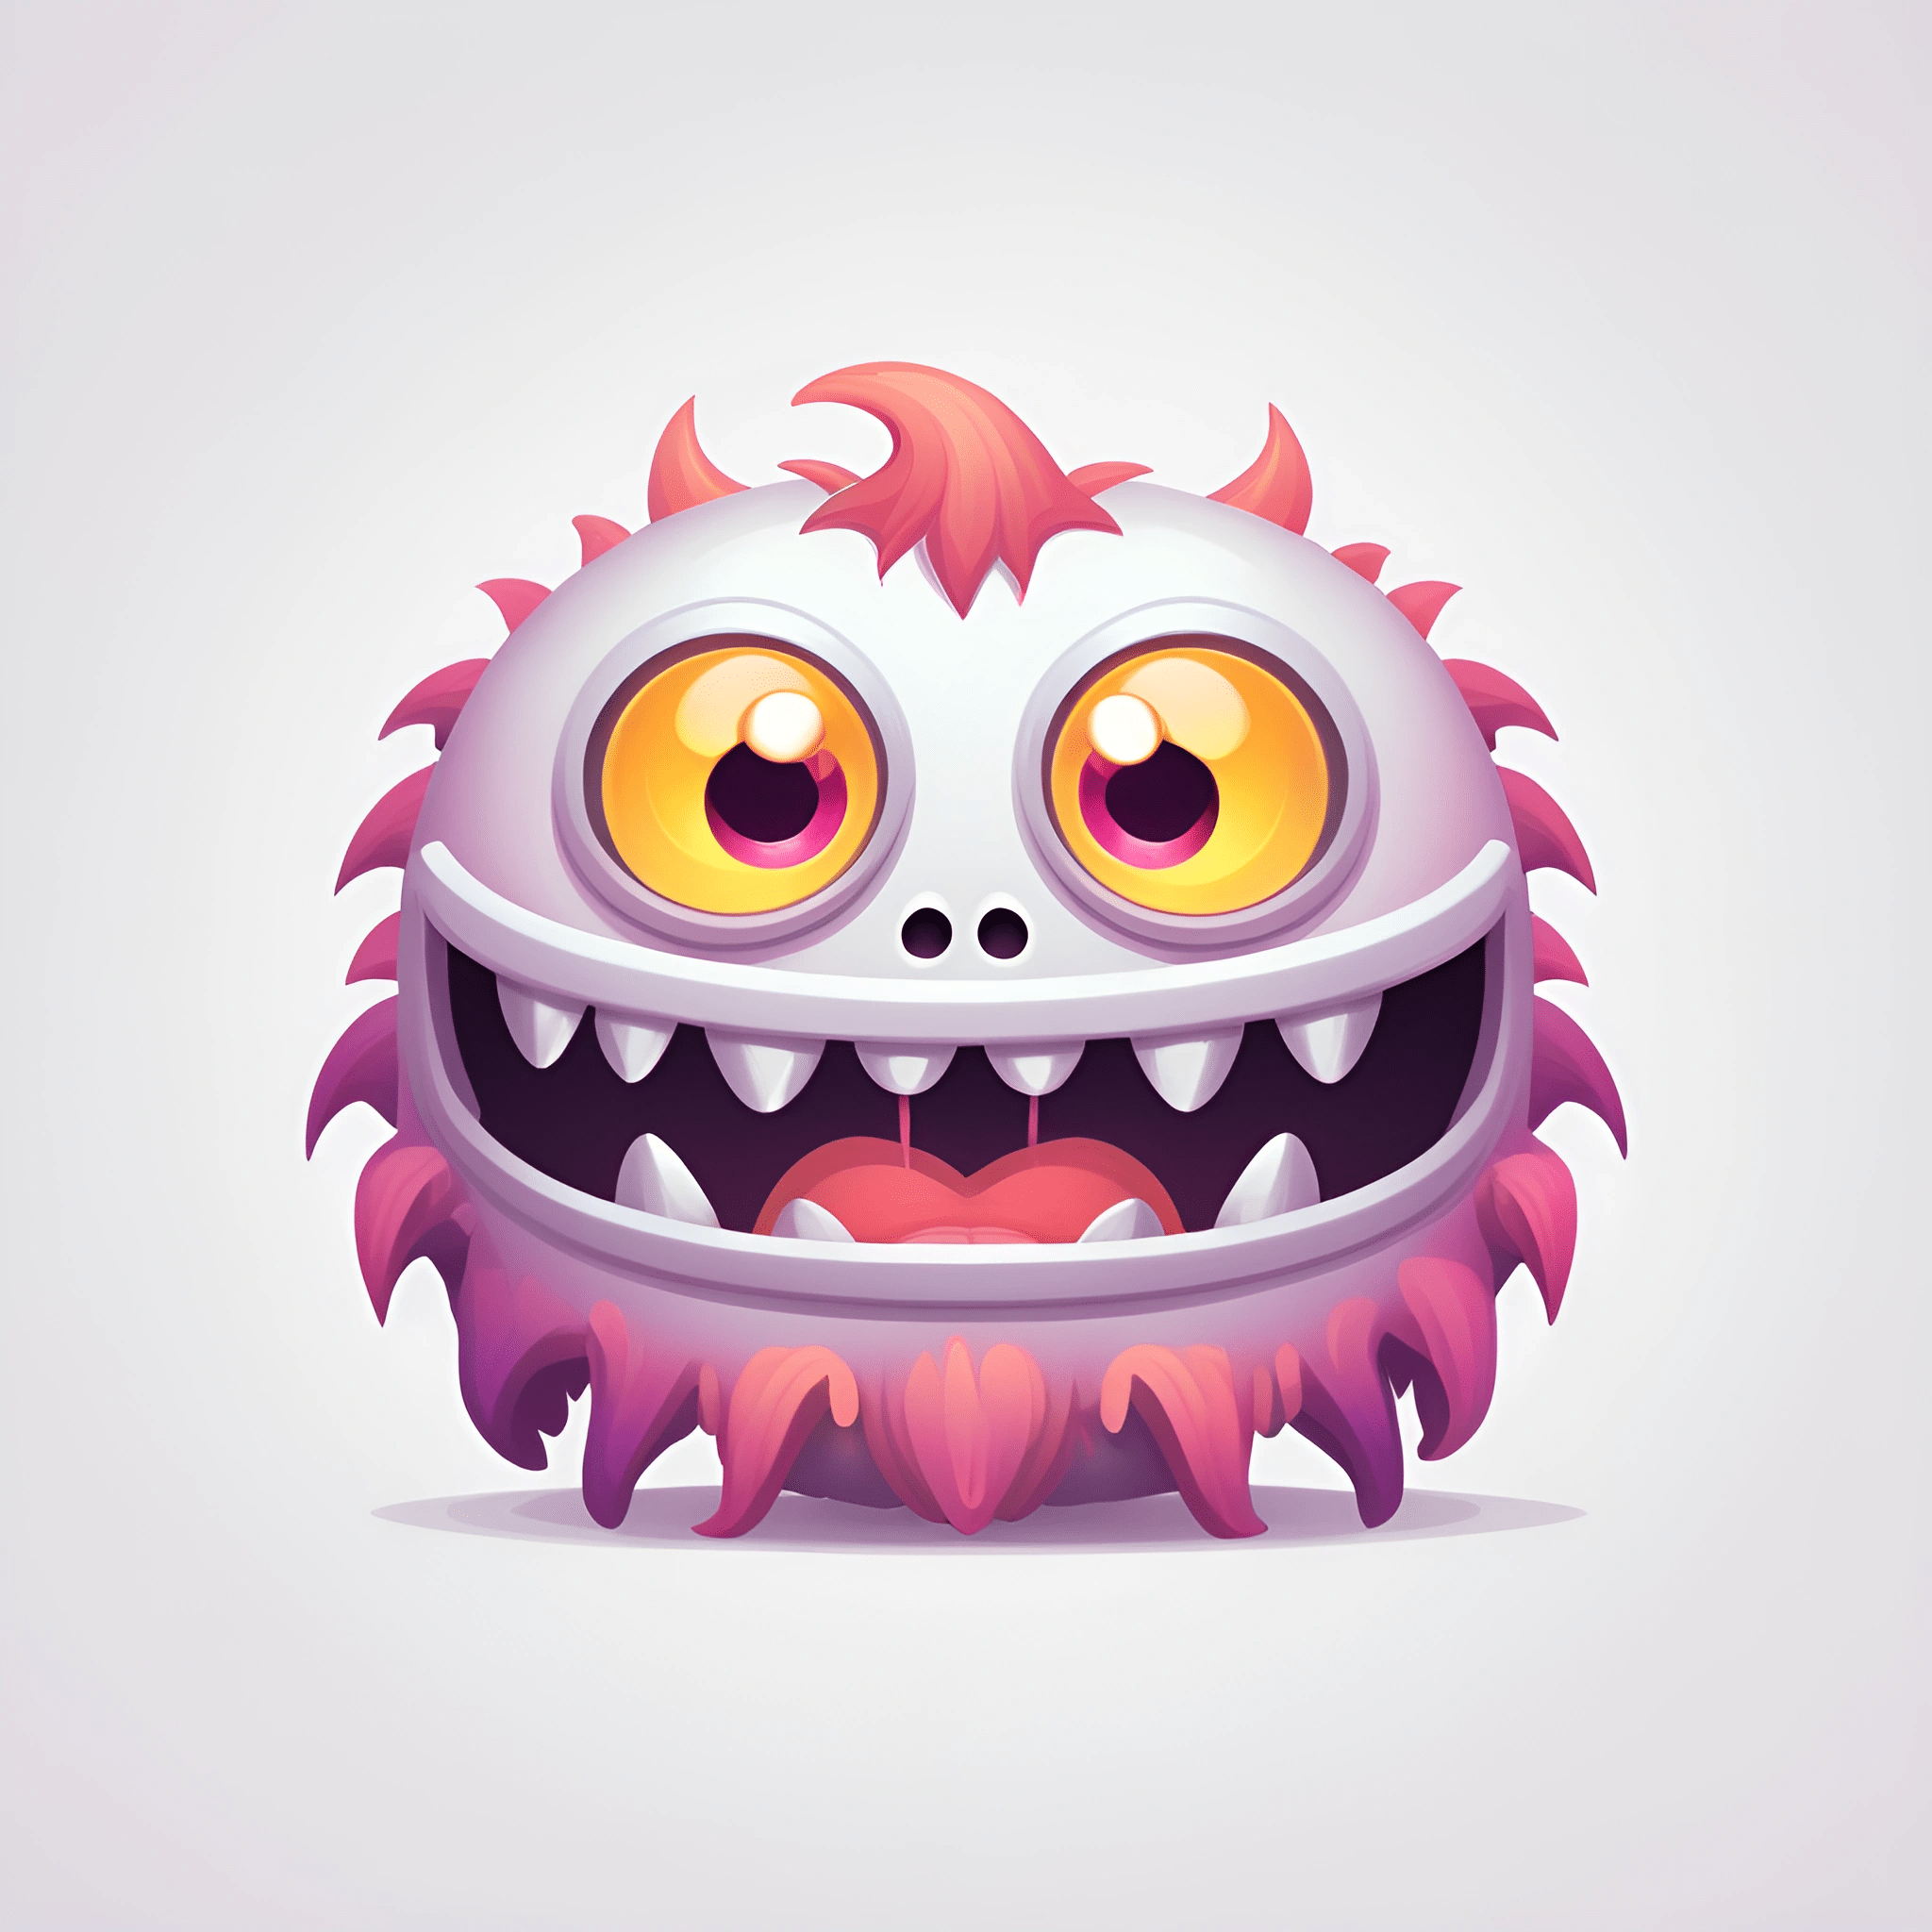 cartoon monster with big eyes and pink hair